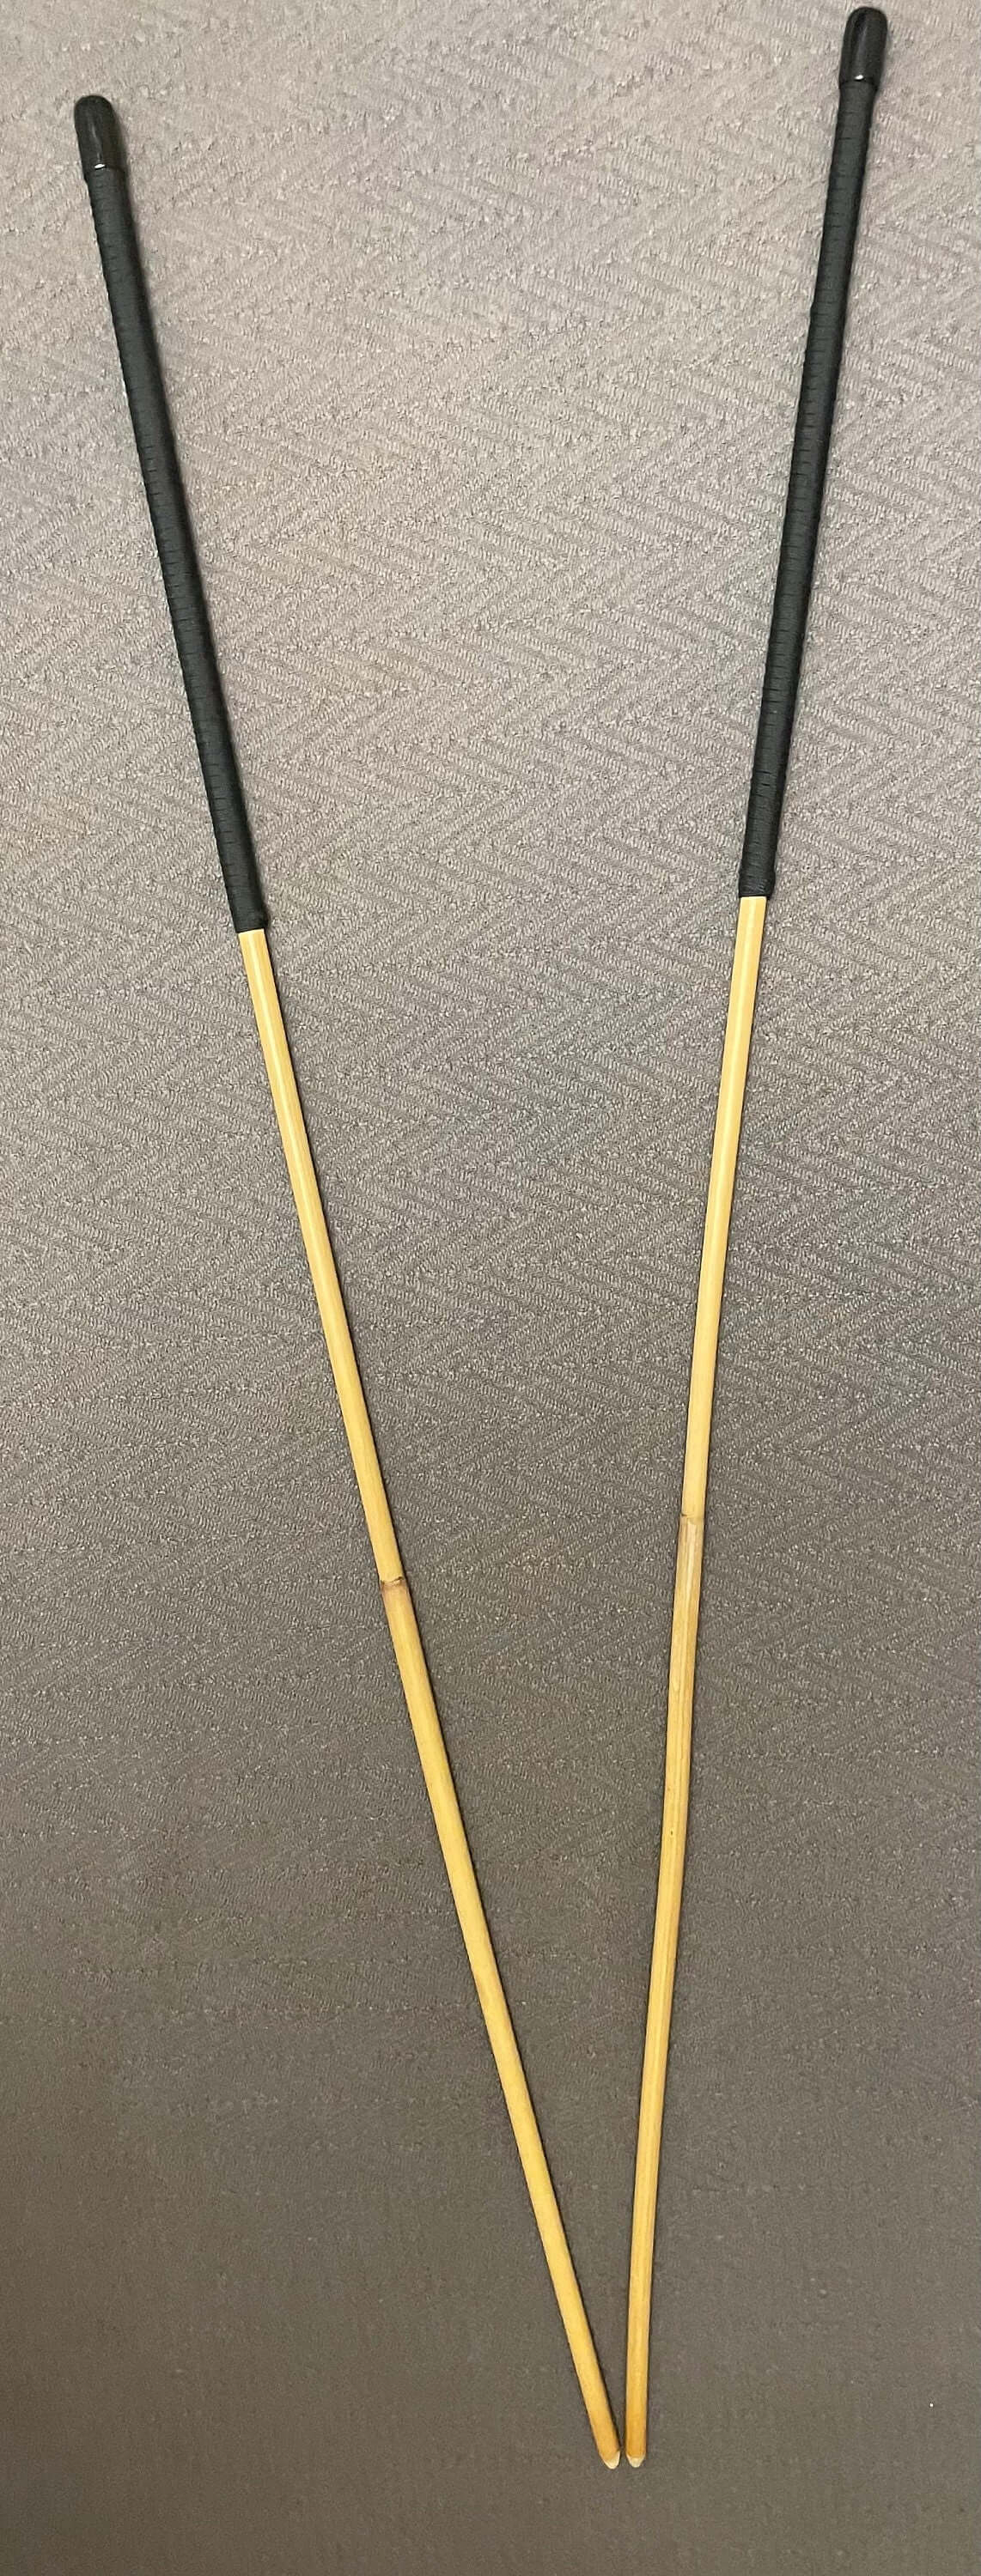 Set of 2 Classic Dragon Rattan Canes / School Canes - 90-95 cms Length with Paracord Handles